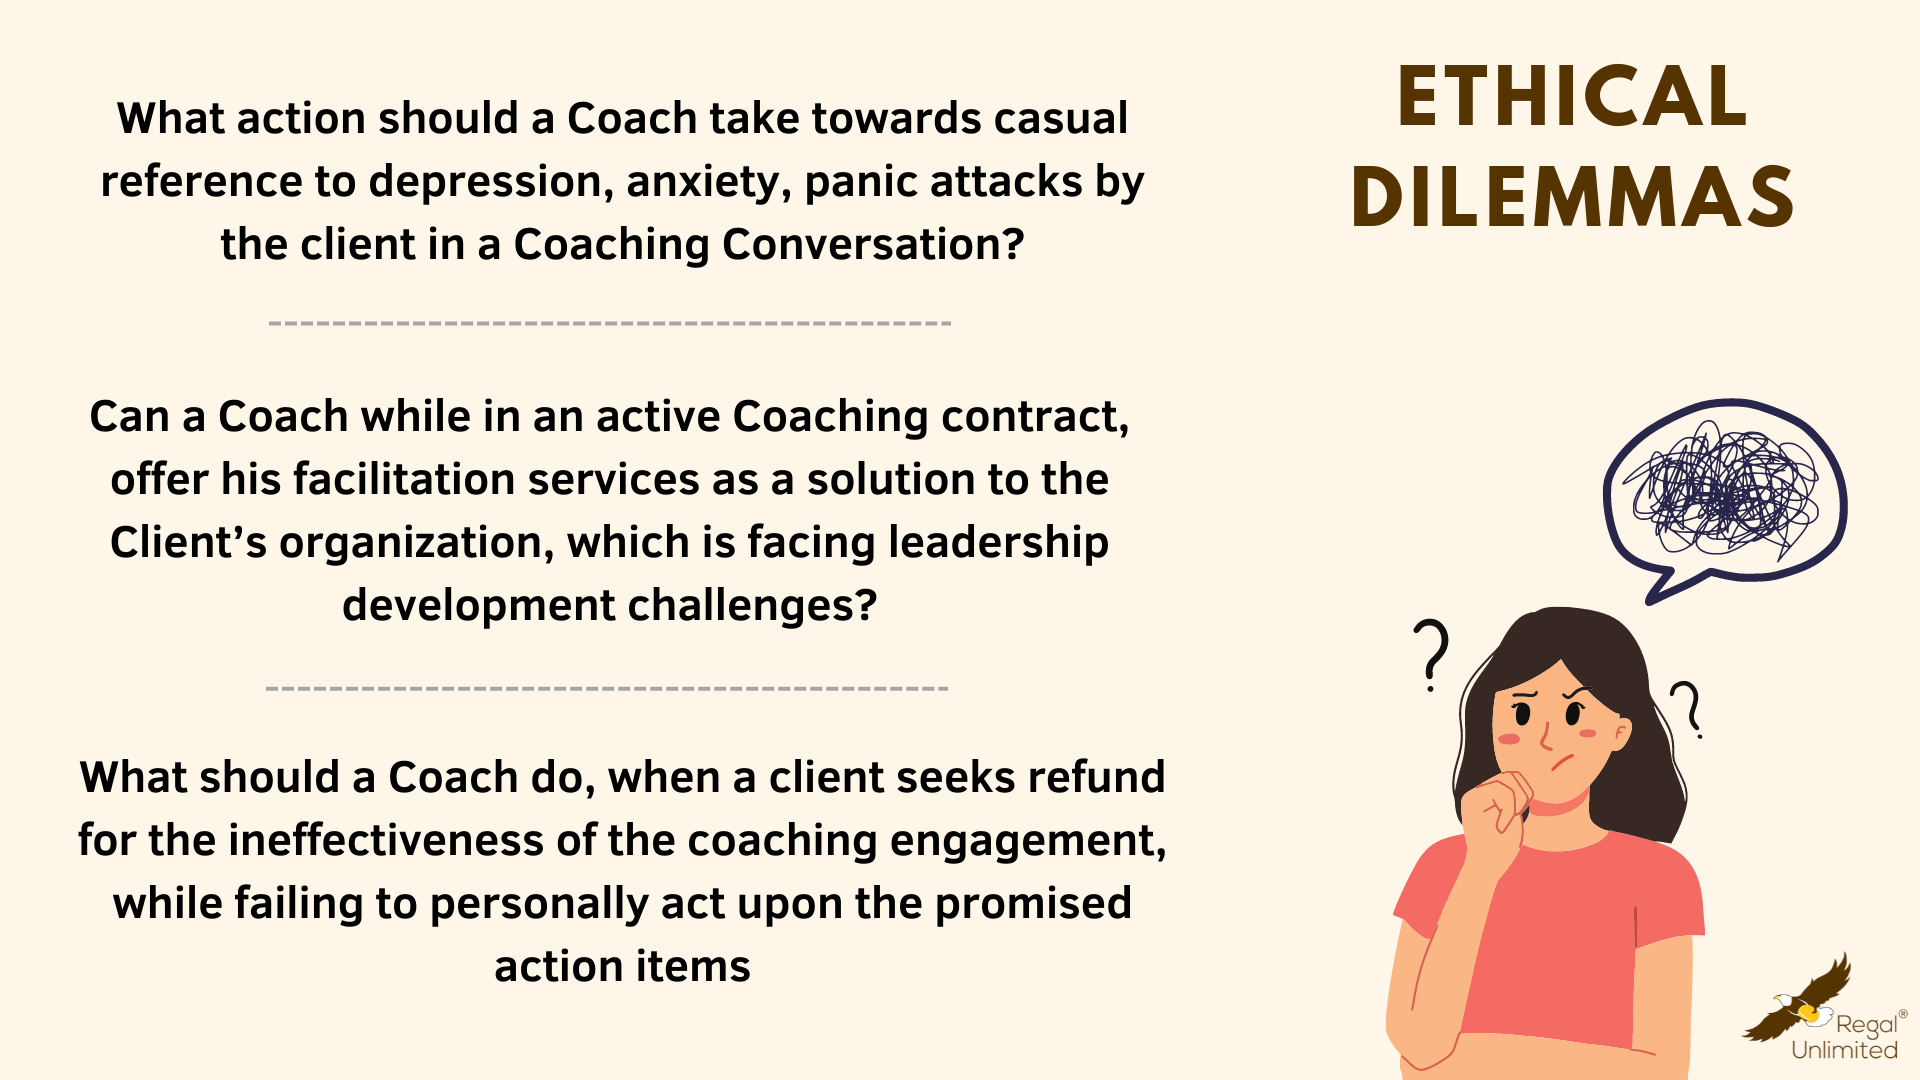 Ethical Dilemmas of a Coach and the use of ICF Code of ethics